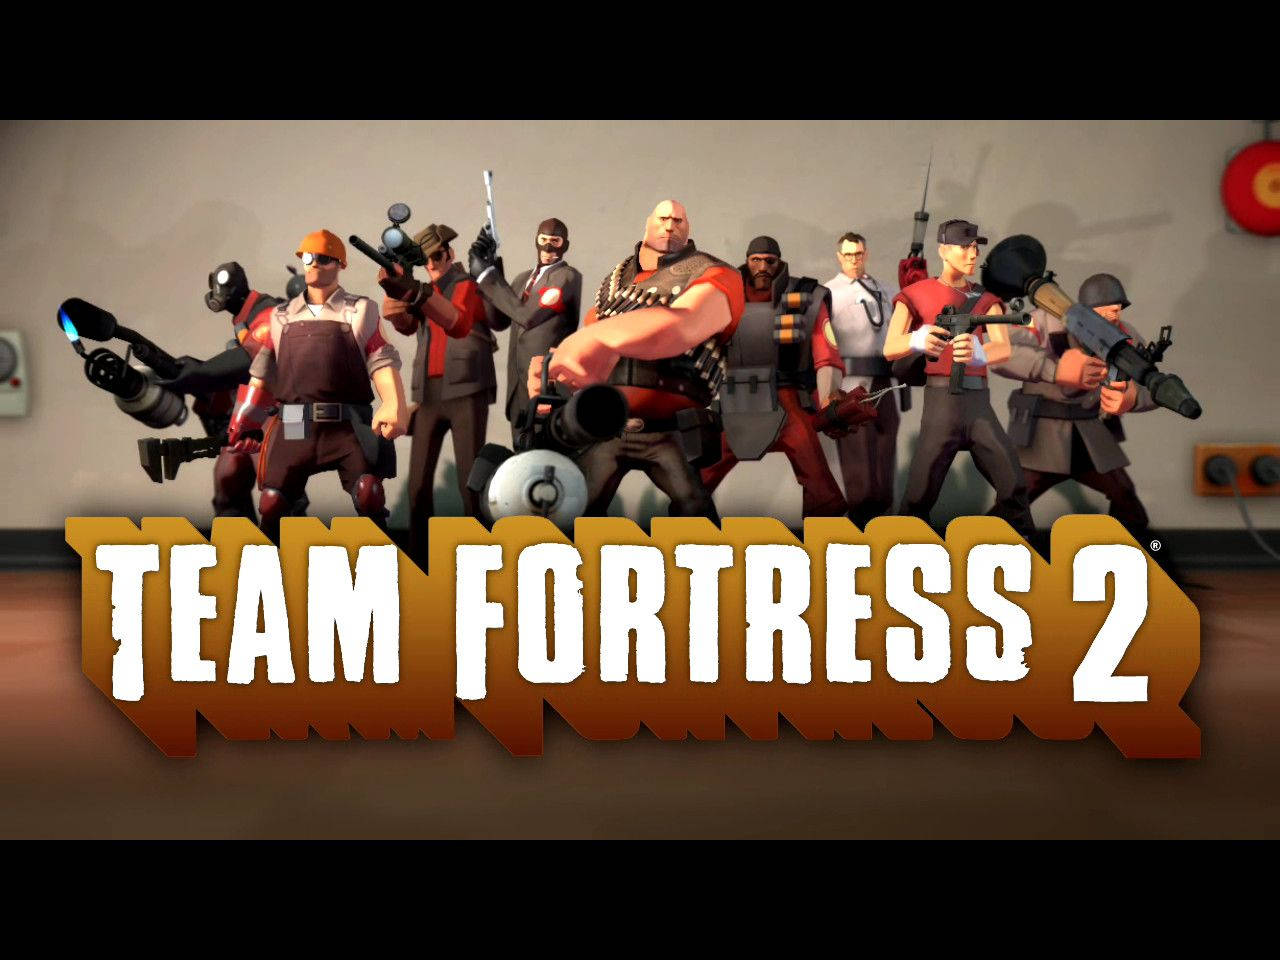 Team Fortress 2 Players Poster